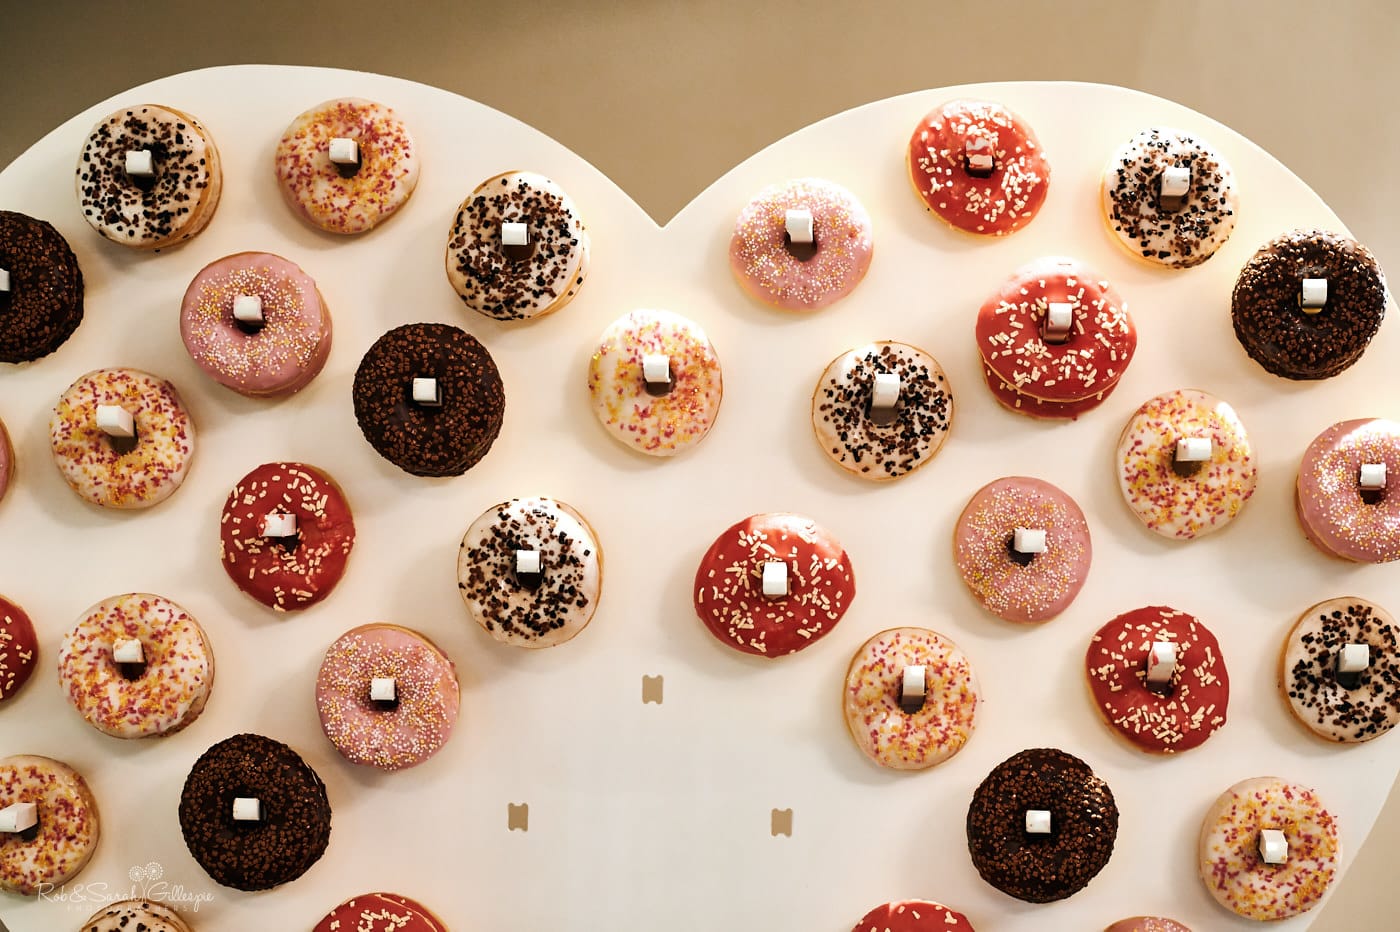 Detail of donuts on board at wedding party